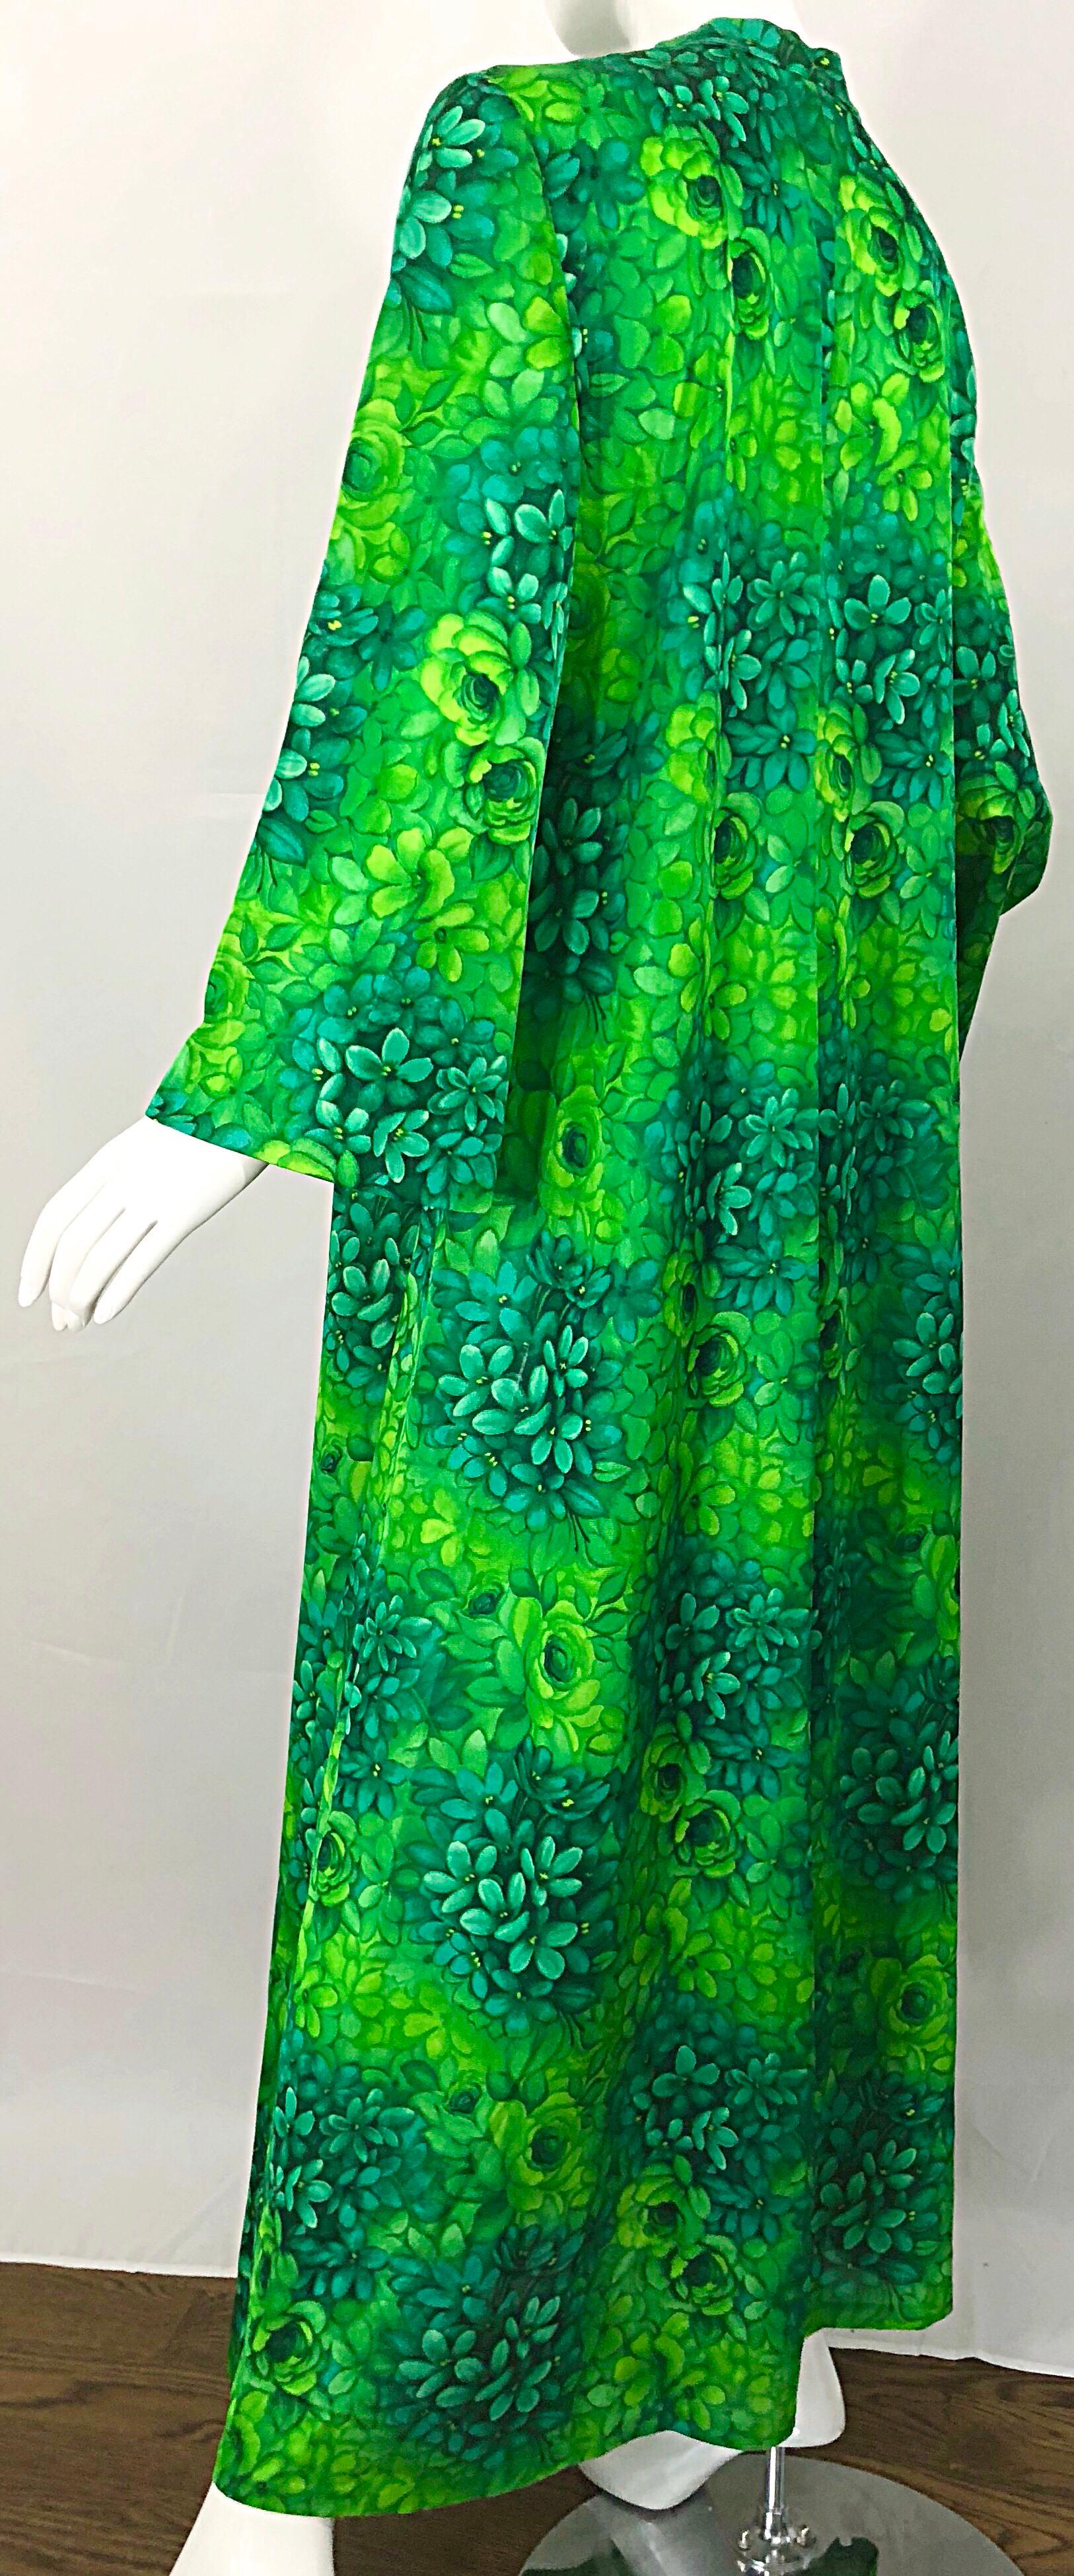 Amazing 1970s Neon + Kelly Green Abstract Flower Print 70s Vintage Caftan Dress 3